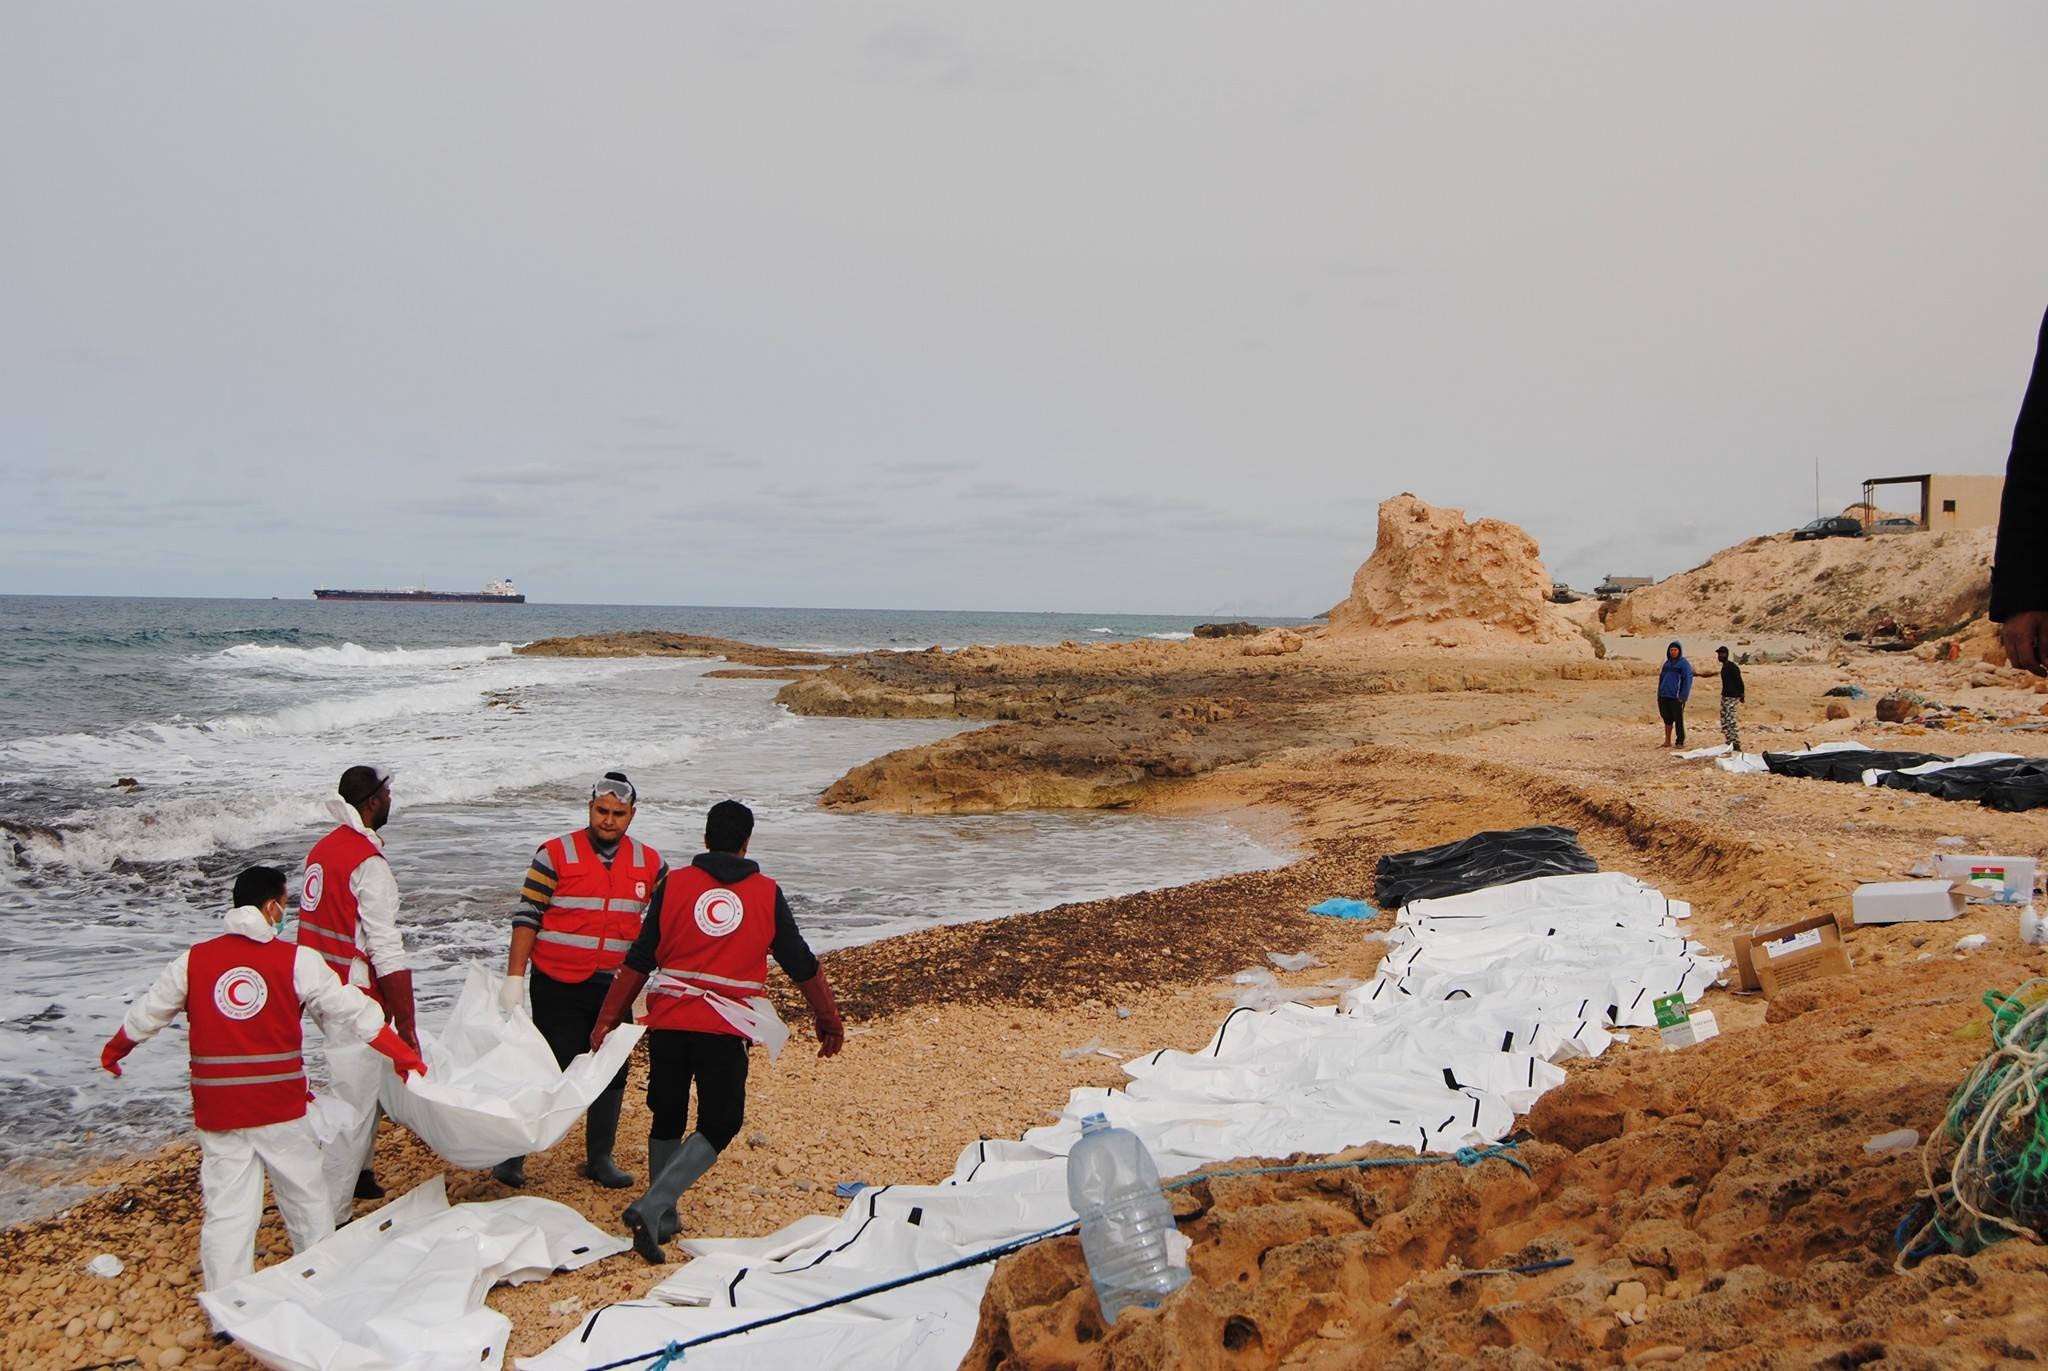 74 Bodies of Migrants Wash Ashore In Libya After Attempted Crossing